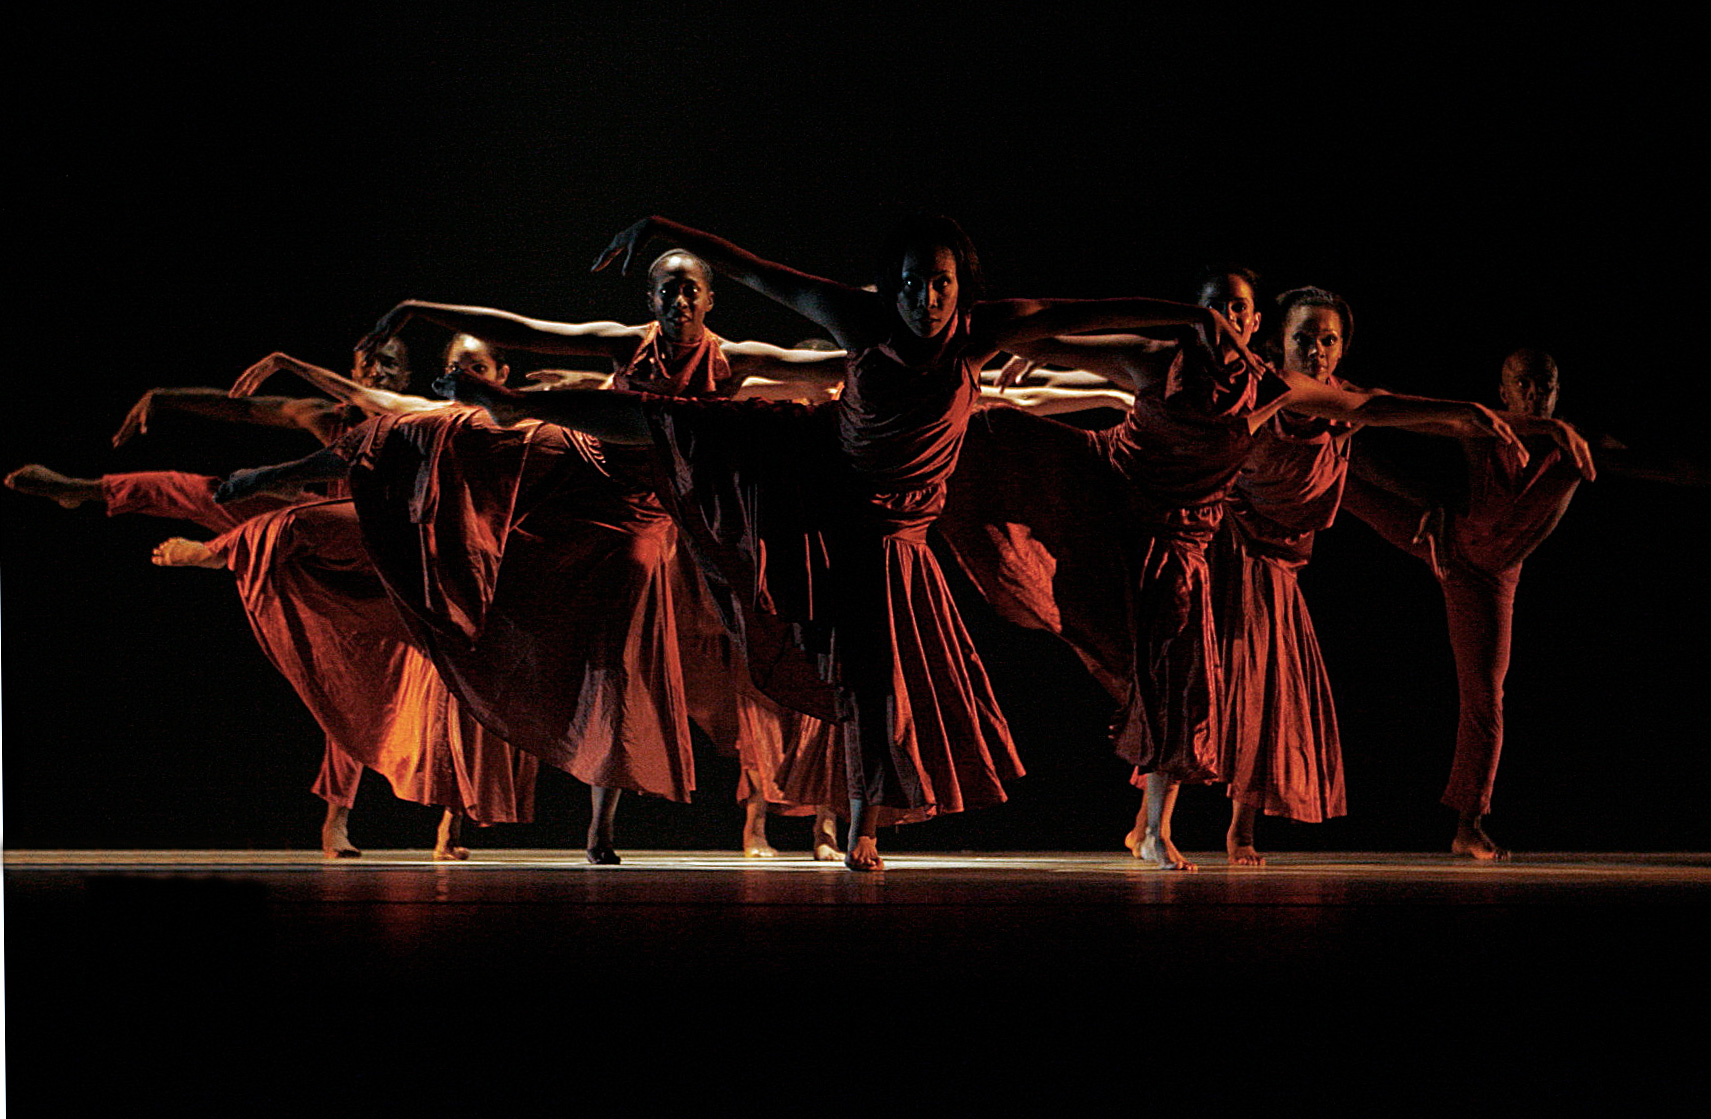 An excerpt from Allan Balfour’s 1987 choreography, Red Clay, during the NDDCI’s 25th anniversary production, DAM 25. Photo courtesy David Wears for the NDDCI.